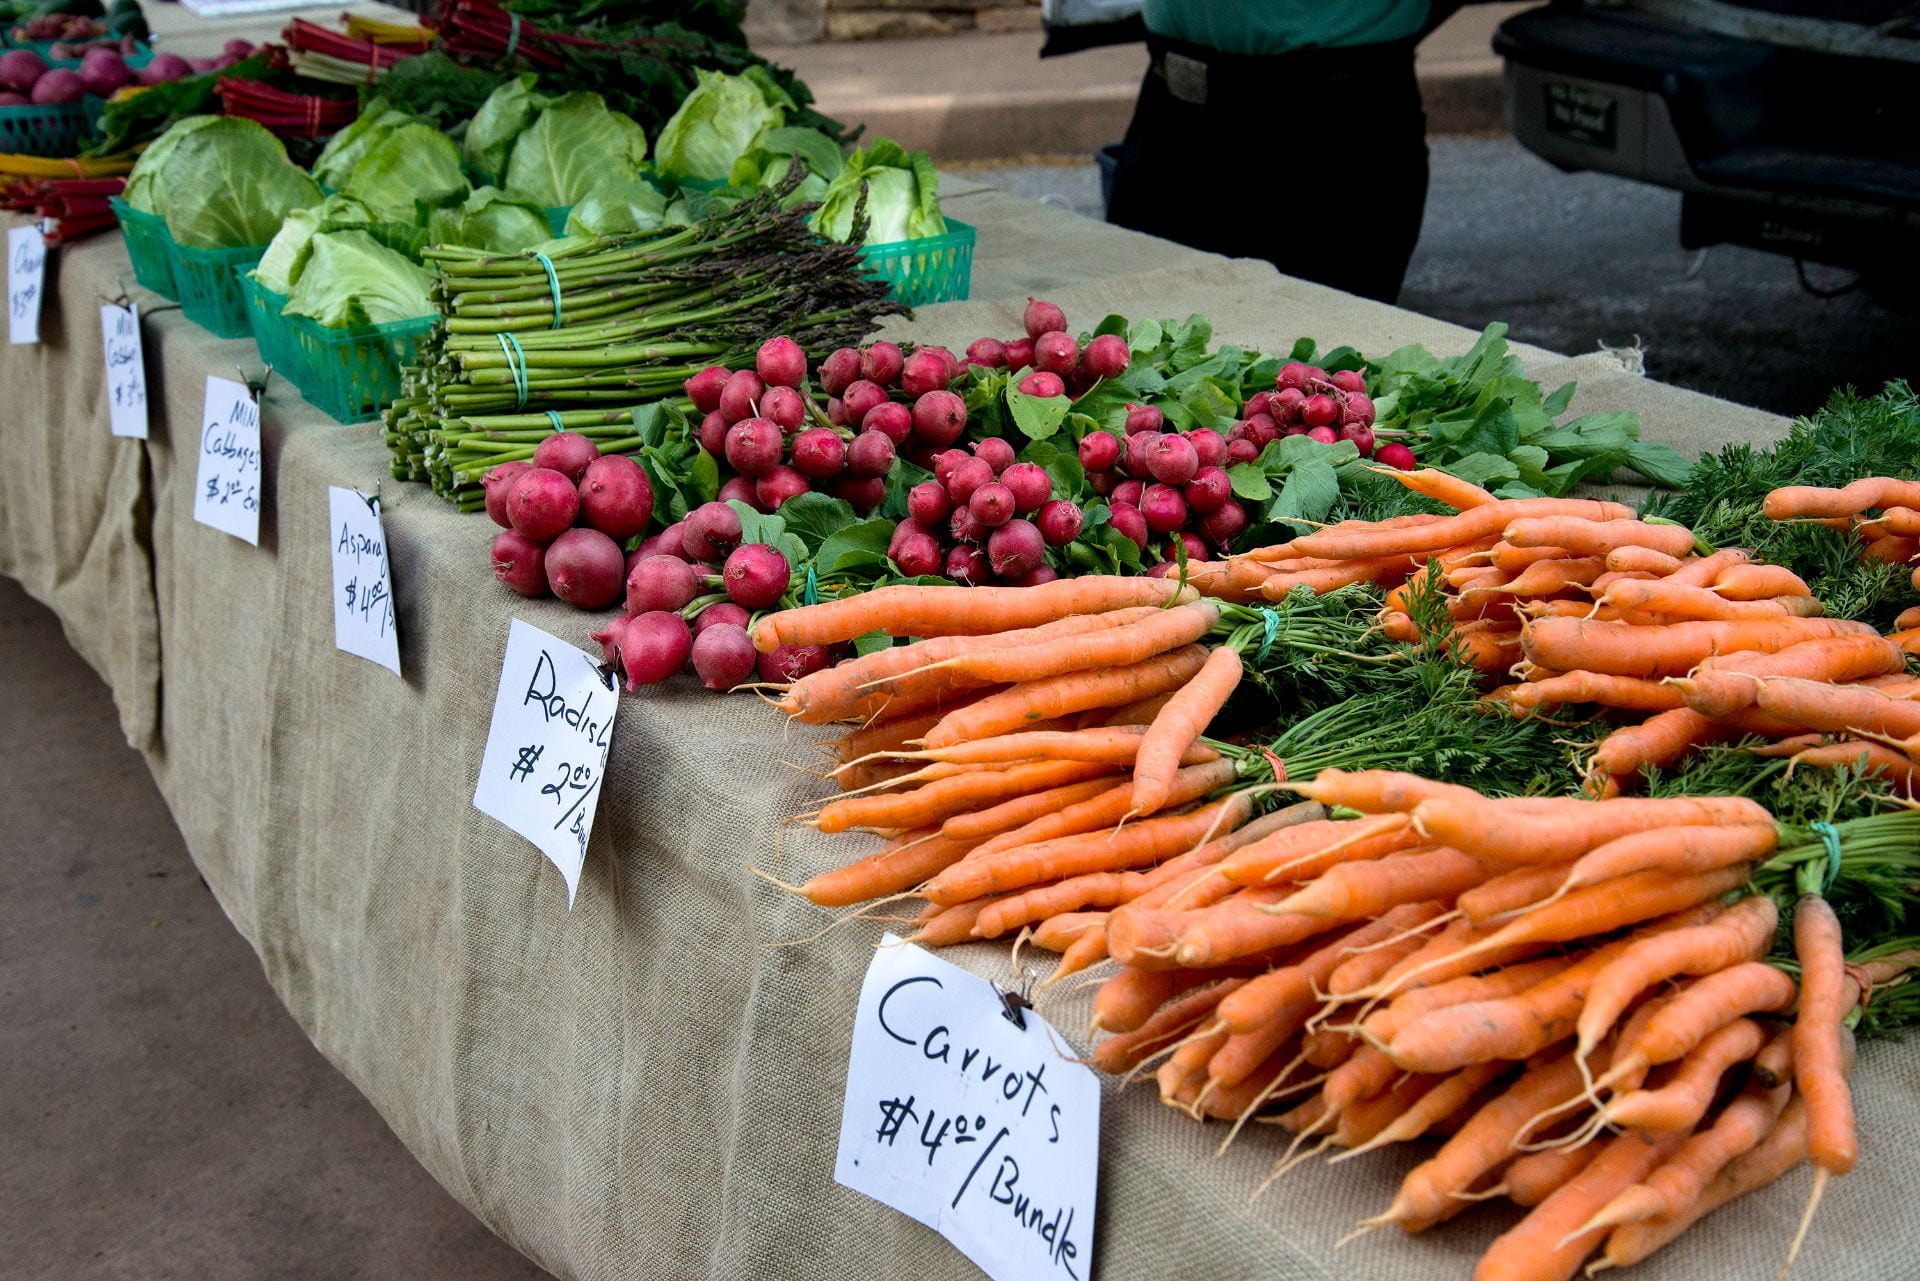 Table at a farmers market, displaying lettuce, asparagus, radishes and carrots for sale.